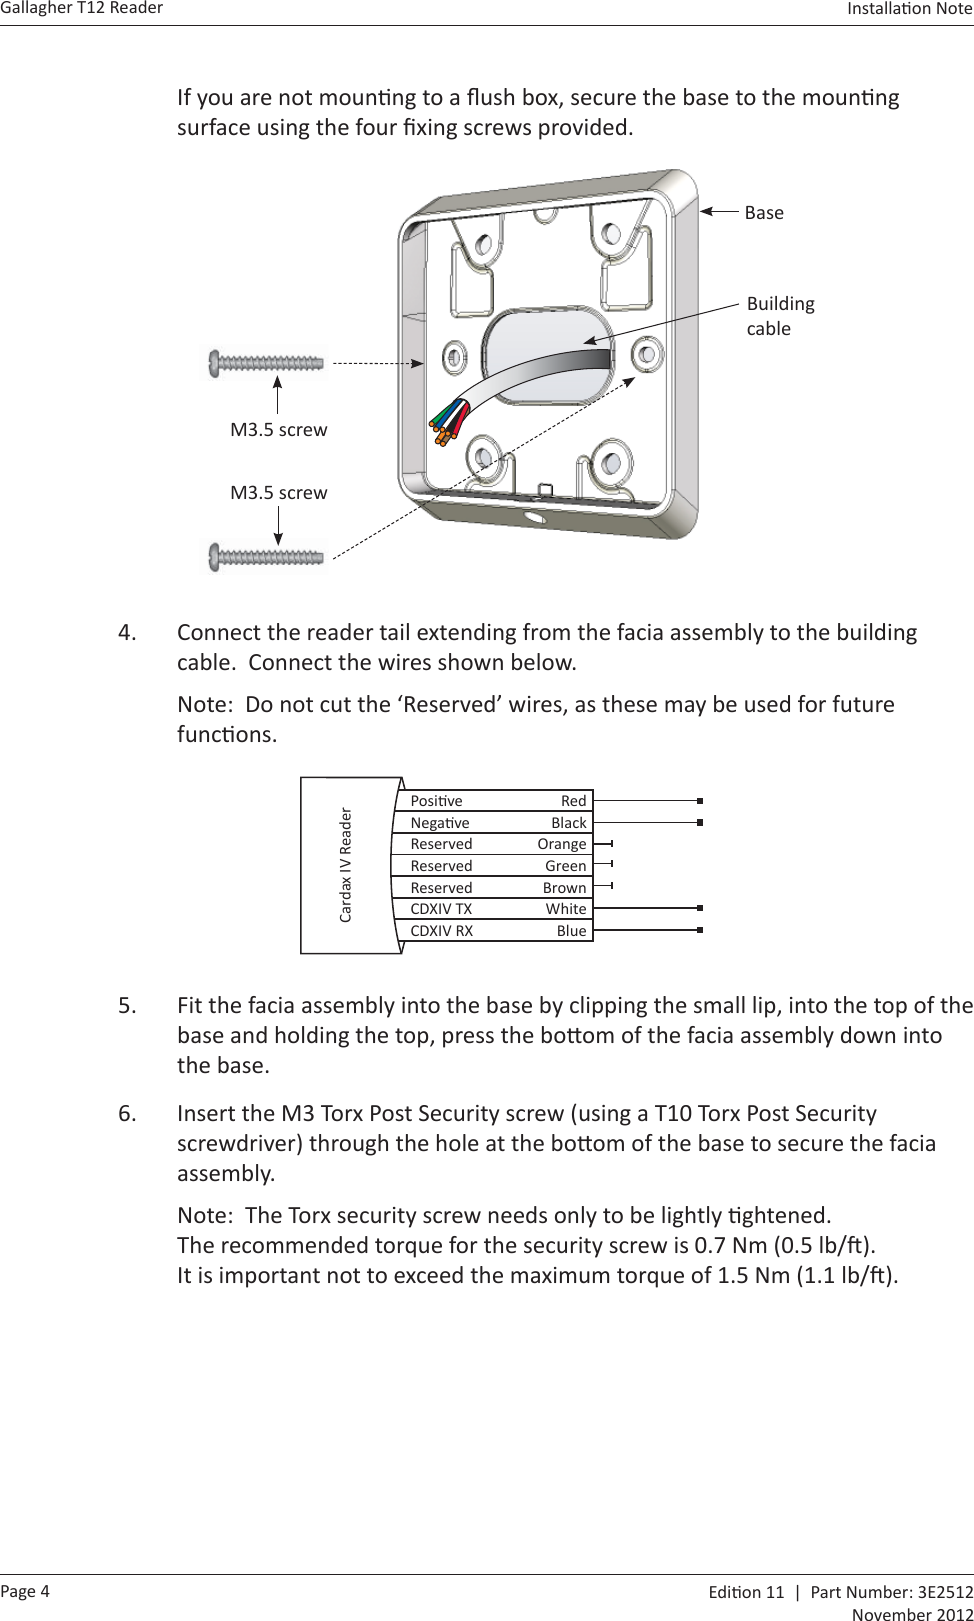 Page 4Gallagher T12 Reader  Edi on 11  |  Part Number: 3E2512November 2012Installa on Note  If you are not moun ng to a ﬂ ush box, secure the base to the moun ng surface using the four ﬁ xing screws provided. BaseBuilding cableM3.5 screwM3.5 screw4.  Connect the reader tail extending from the facia assembly to the building cable.  Connect the wires shown below.Note:  Do not cut the ‘Reserved’ wires, as these may be used for future func ons.    Posi ve RedNega ve BlackReserved OrangeReserved GreenReserved BrownCDXIV TX WhiteCDXIV RX BlueCardax IV Reader5.  Fit the facia assembly into the base by clipping the small lip, into the top of the base and holding the top, press the bo om of the facia assembly down into the base.6.  Insert the M3 Torx Post Security screw (using a T10 Torx Post Security screwdriver) through the hole at the bo om of the base to secure the facia assembly.  Note:  The Torx security screw needs only to be lightly  ghtened. The recommended torque for the security screw is 0.7 Nm (0.5 lb/ ).  It is important not to exceed the maximum torque of 1.5 Nm (1.1 lb/ ).